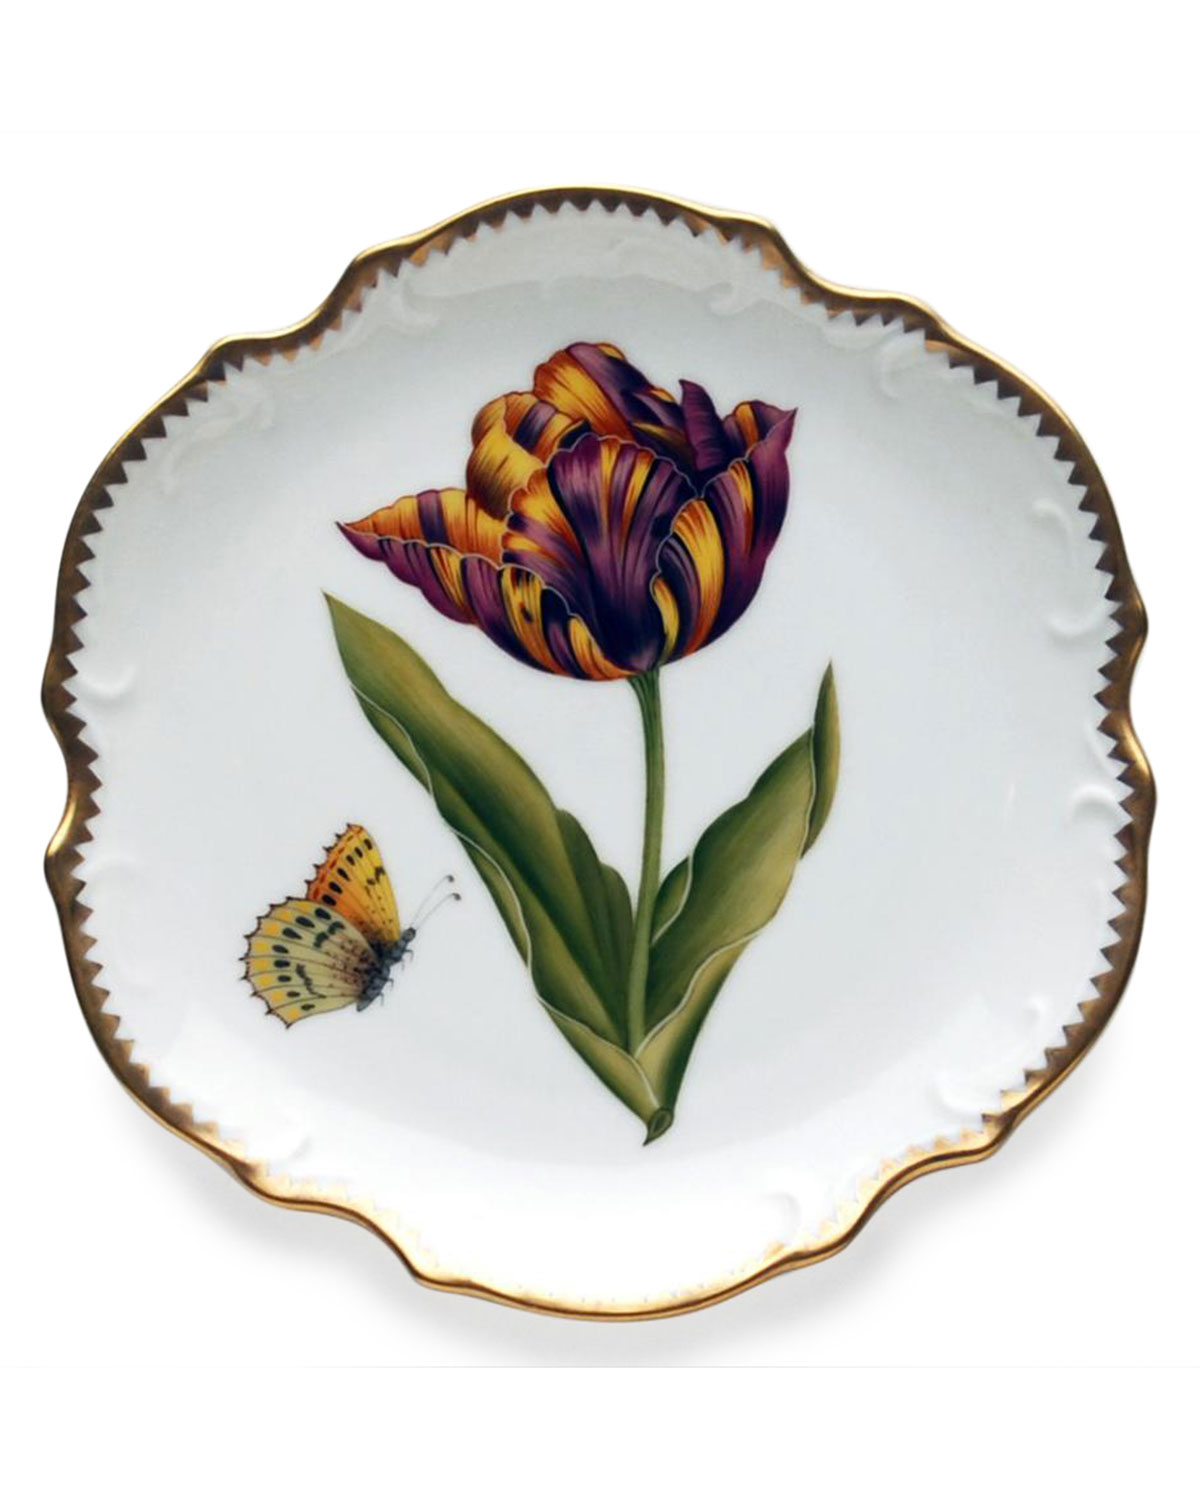 Shop Anna Weatherley Old Master Tulips Bread & Butter Plate